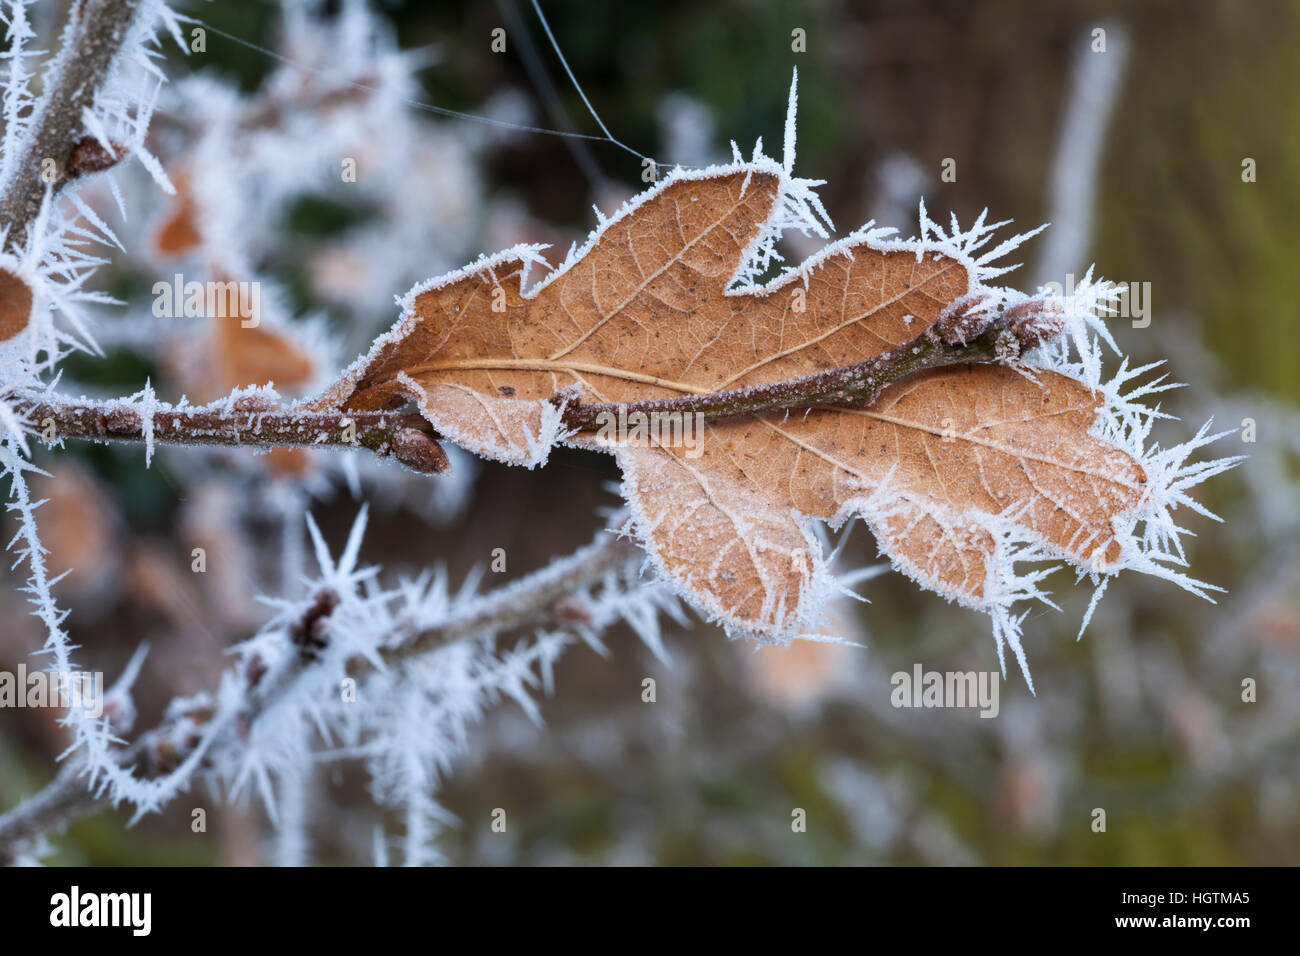 Single oak leaf and twig with new leaf buds formed coated in delicate ice crystal spikes following a hoarfrost, England, UK Stock Photo